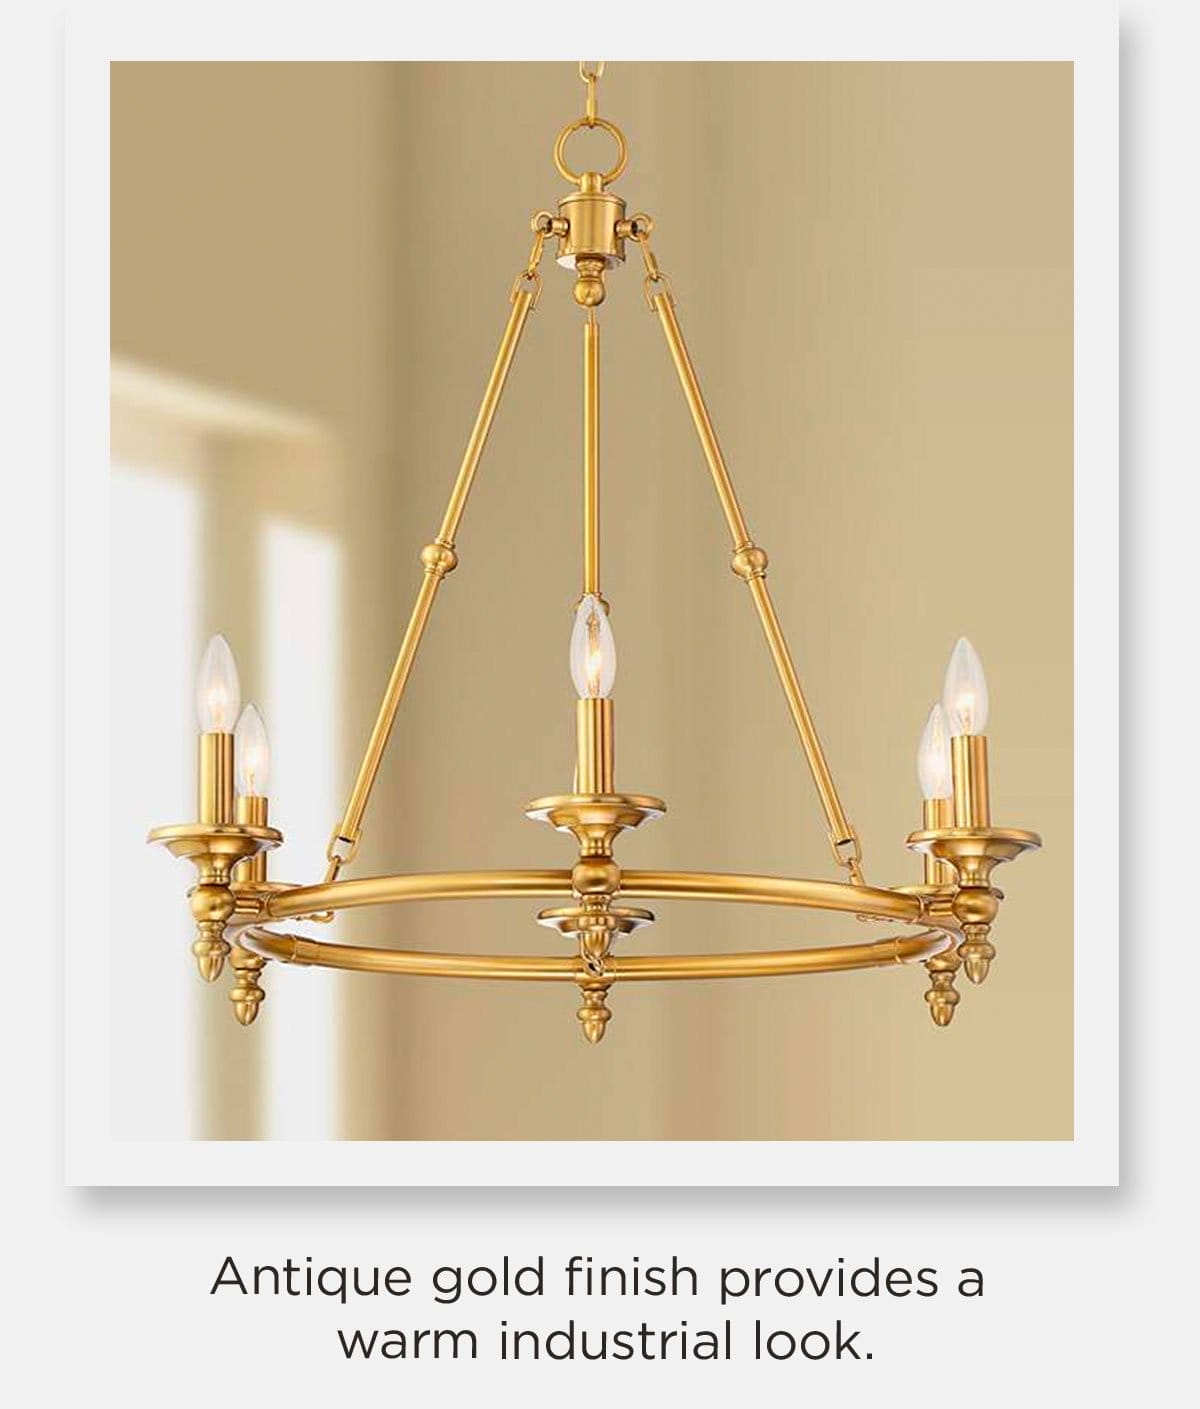 Antique gold finish provides a warm industrial look.